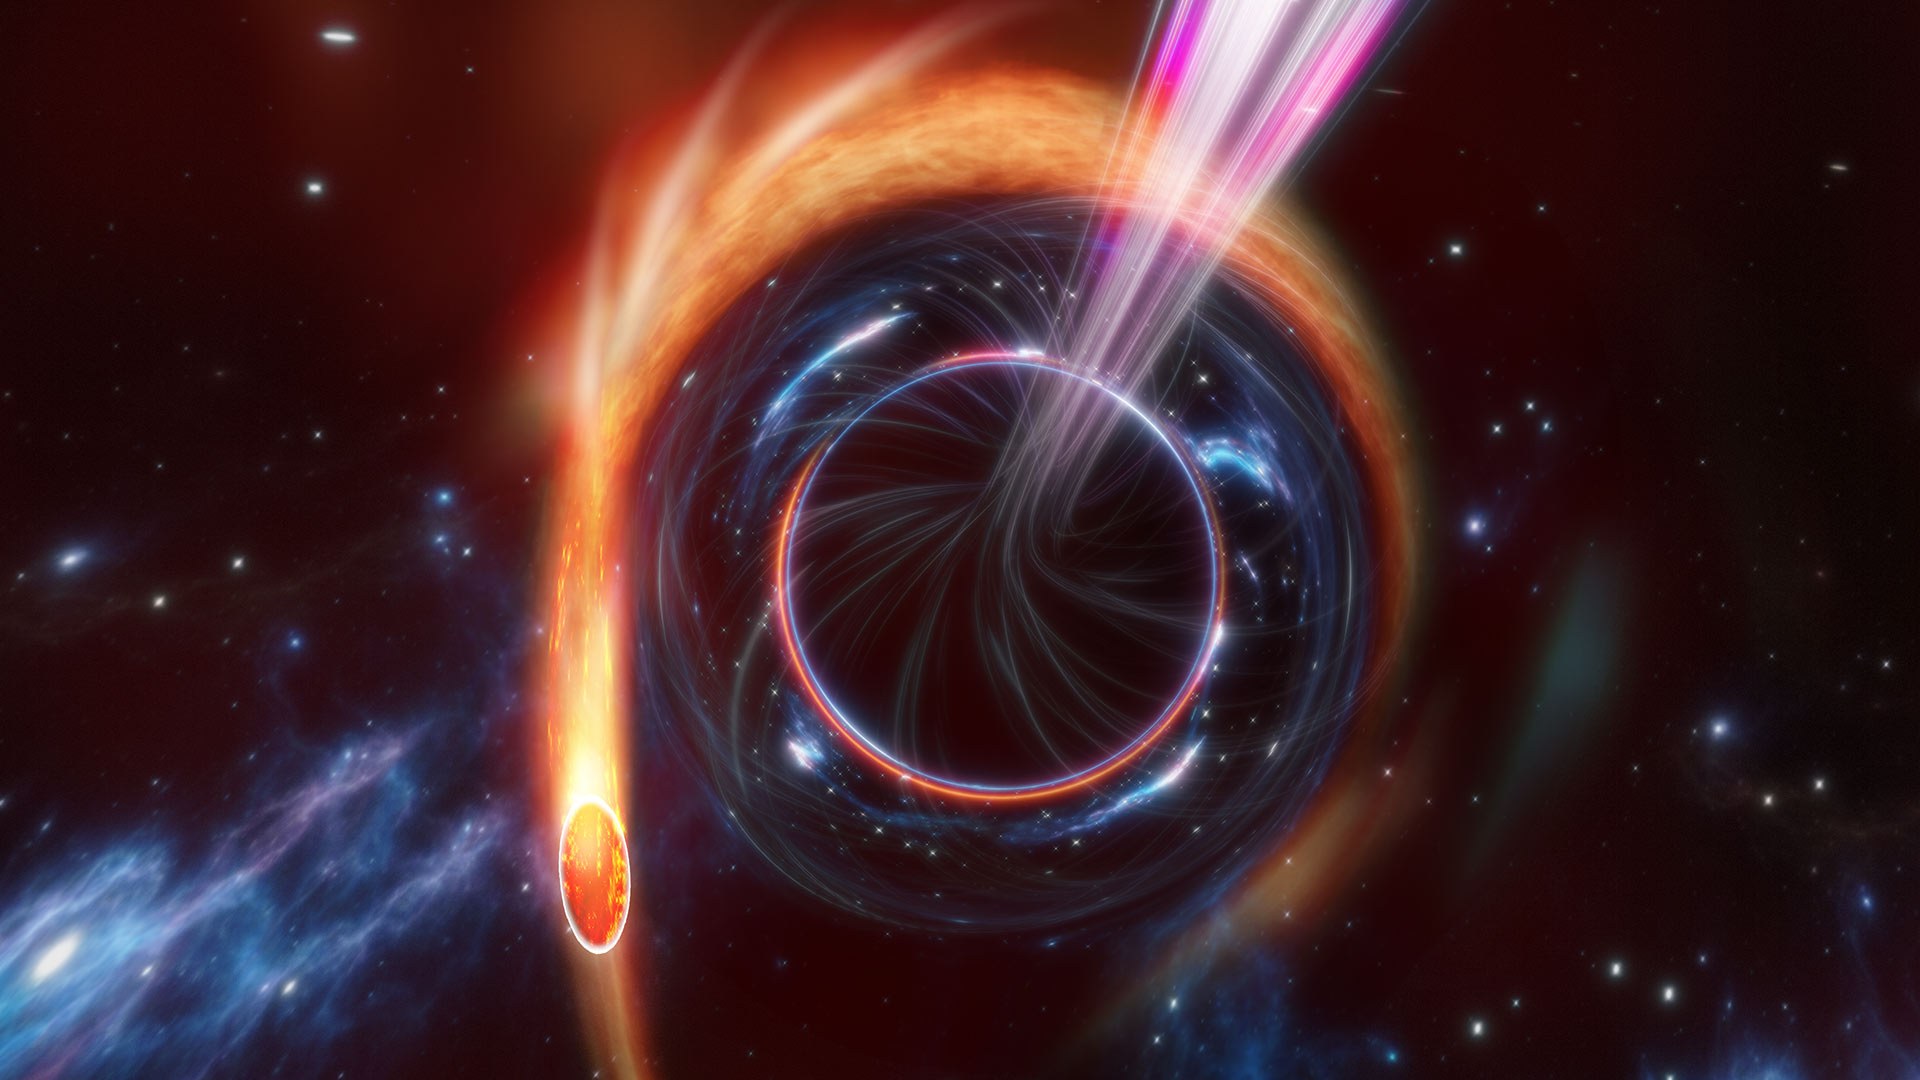 A supermassive black hole destroys a star in an artist's depiction of a tidal disruption event. New UMD research provides insight into the ultrabright jets of matter (shown here in pink, purple and white) that in rare instances result from such cataclysms in deep space.